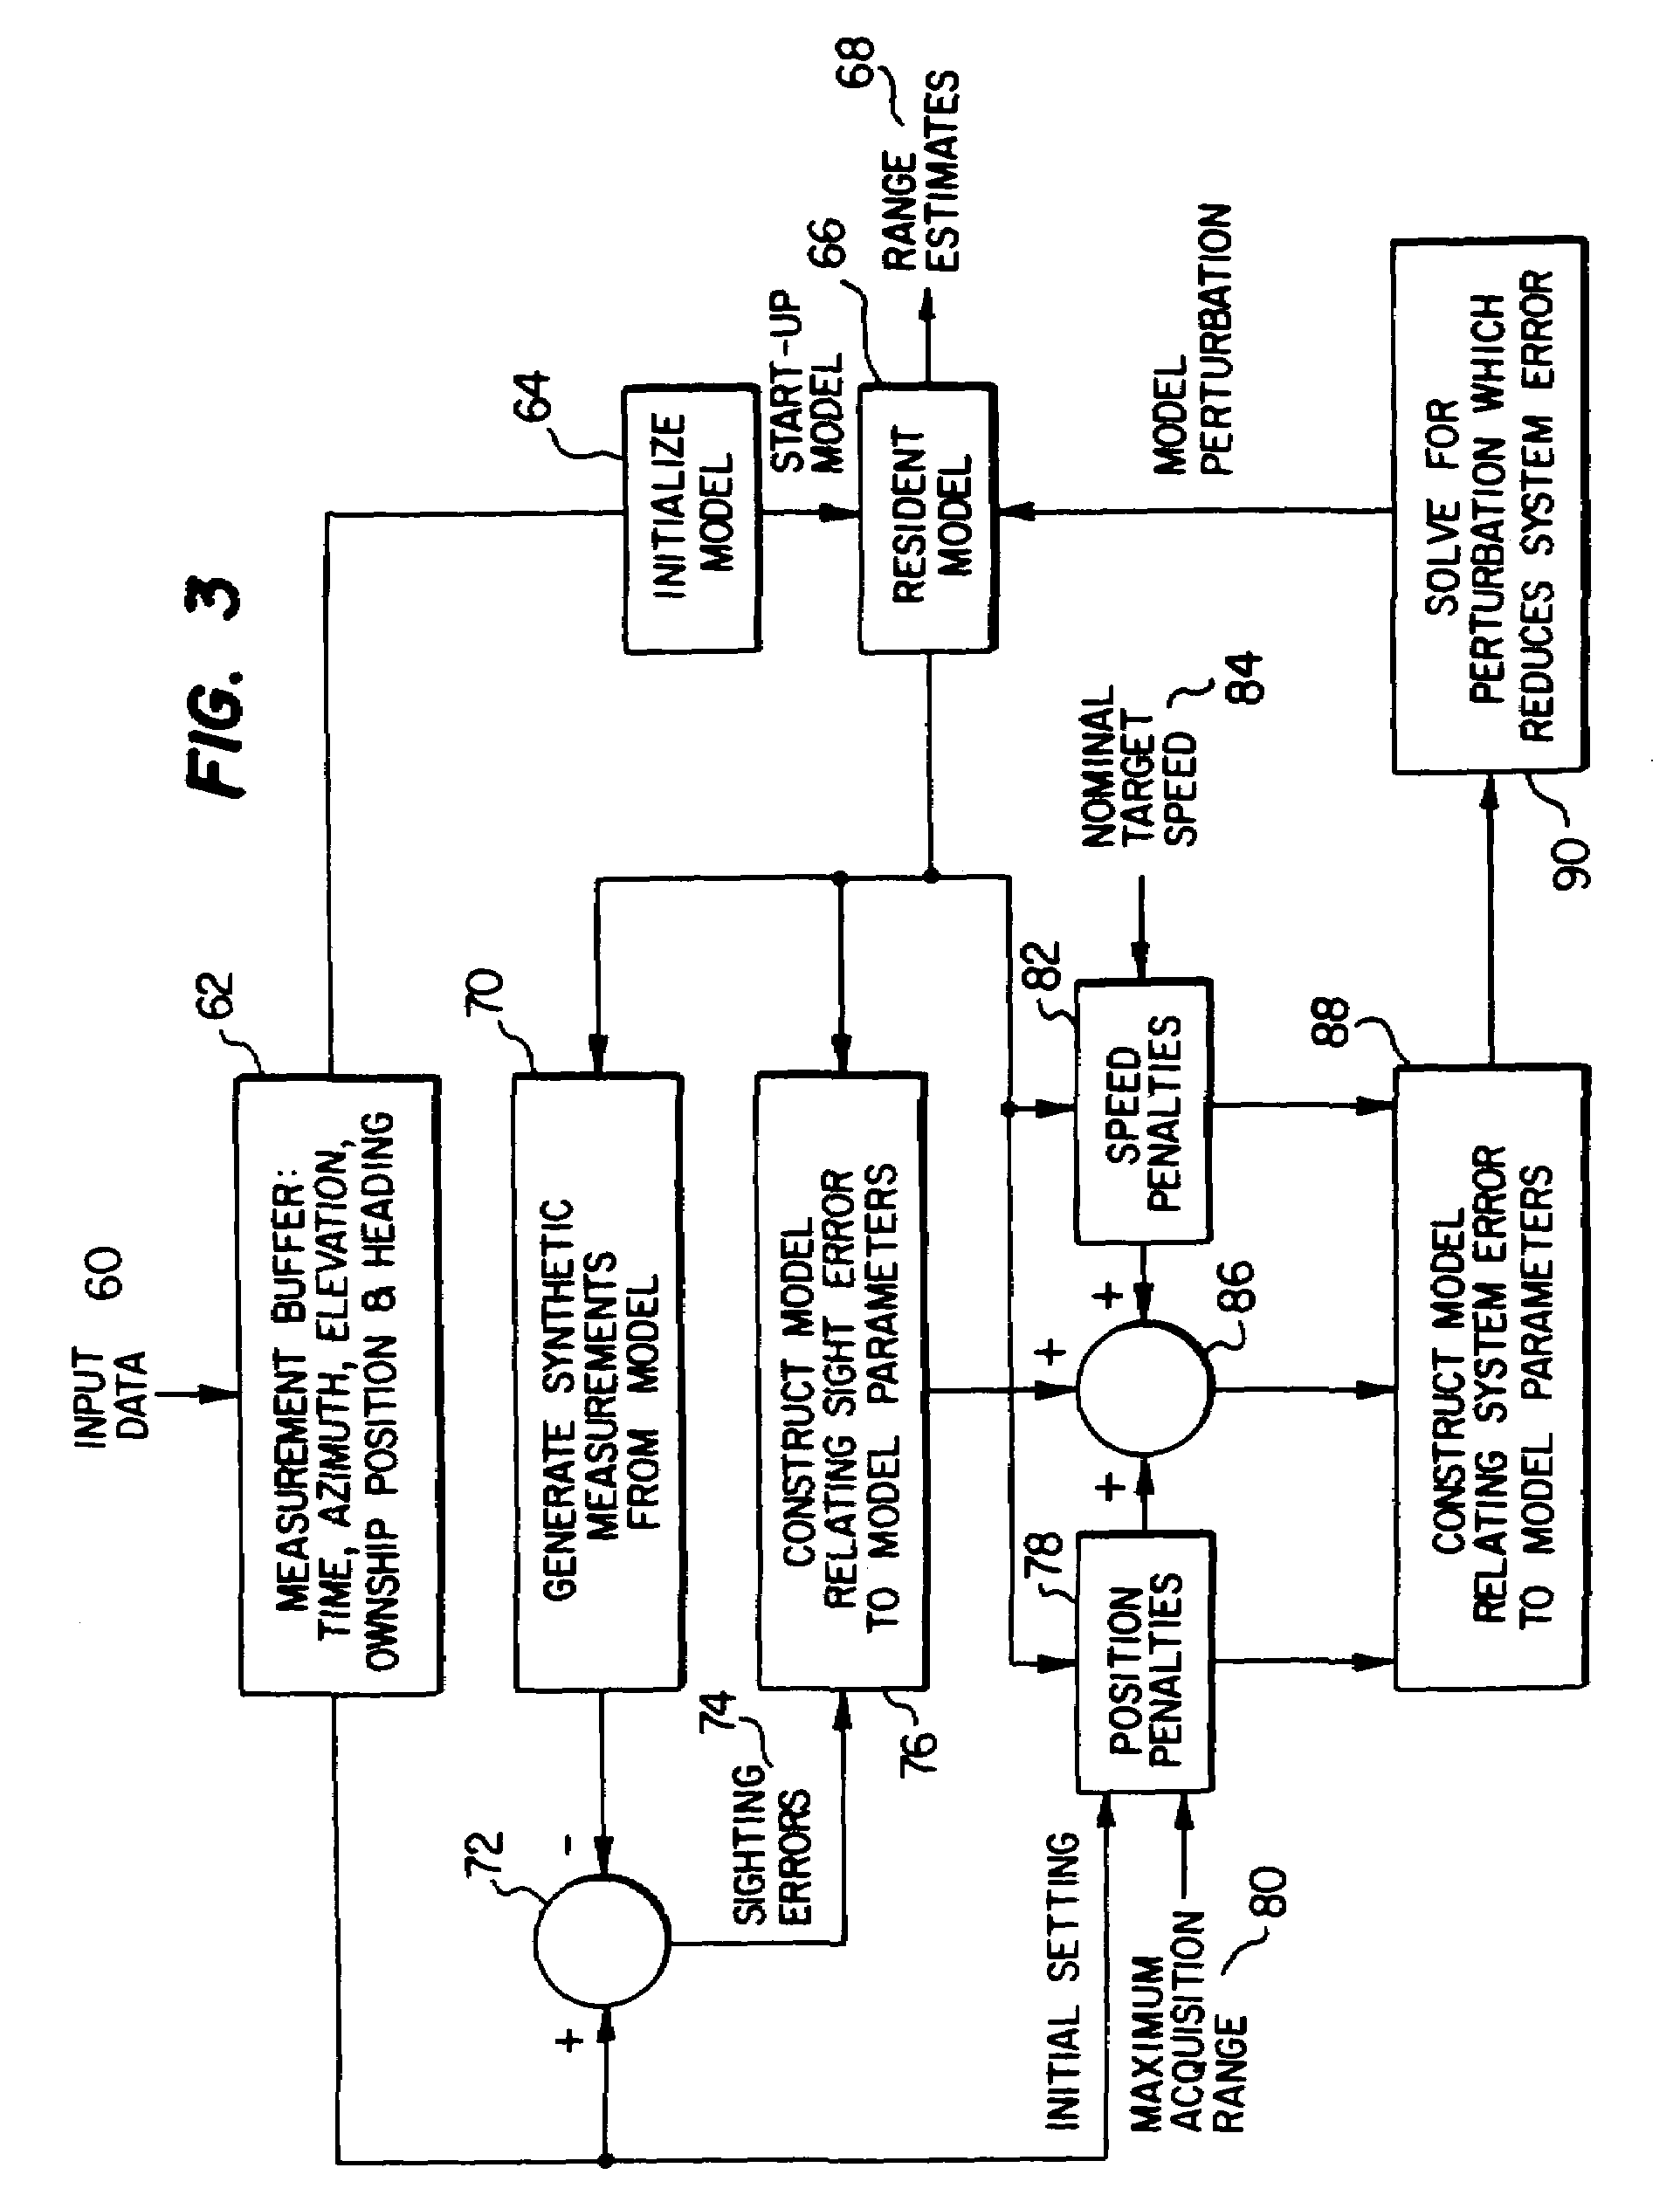 Method and apparatus for air-to-air aircraft ranging